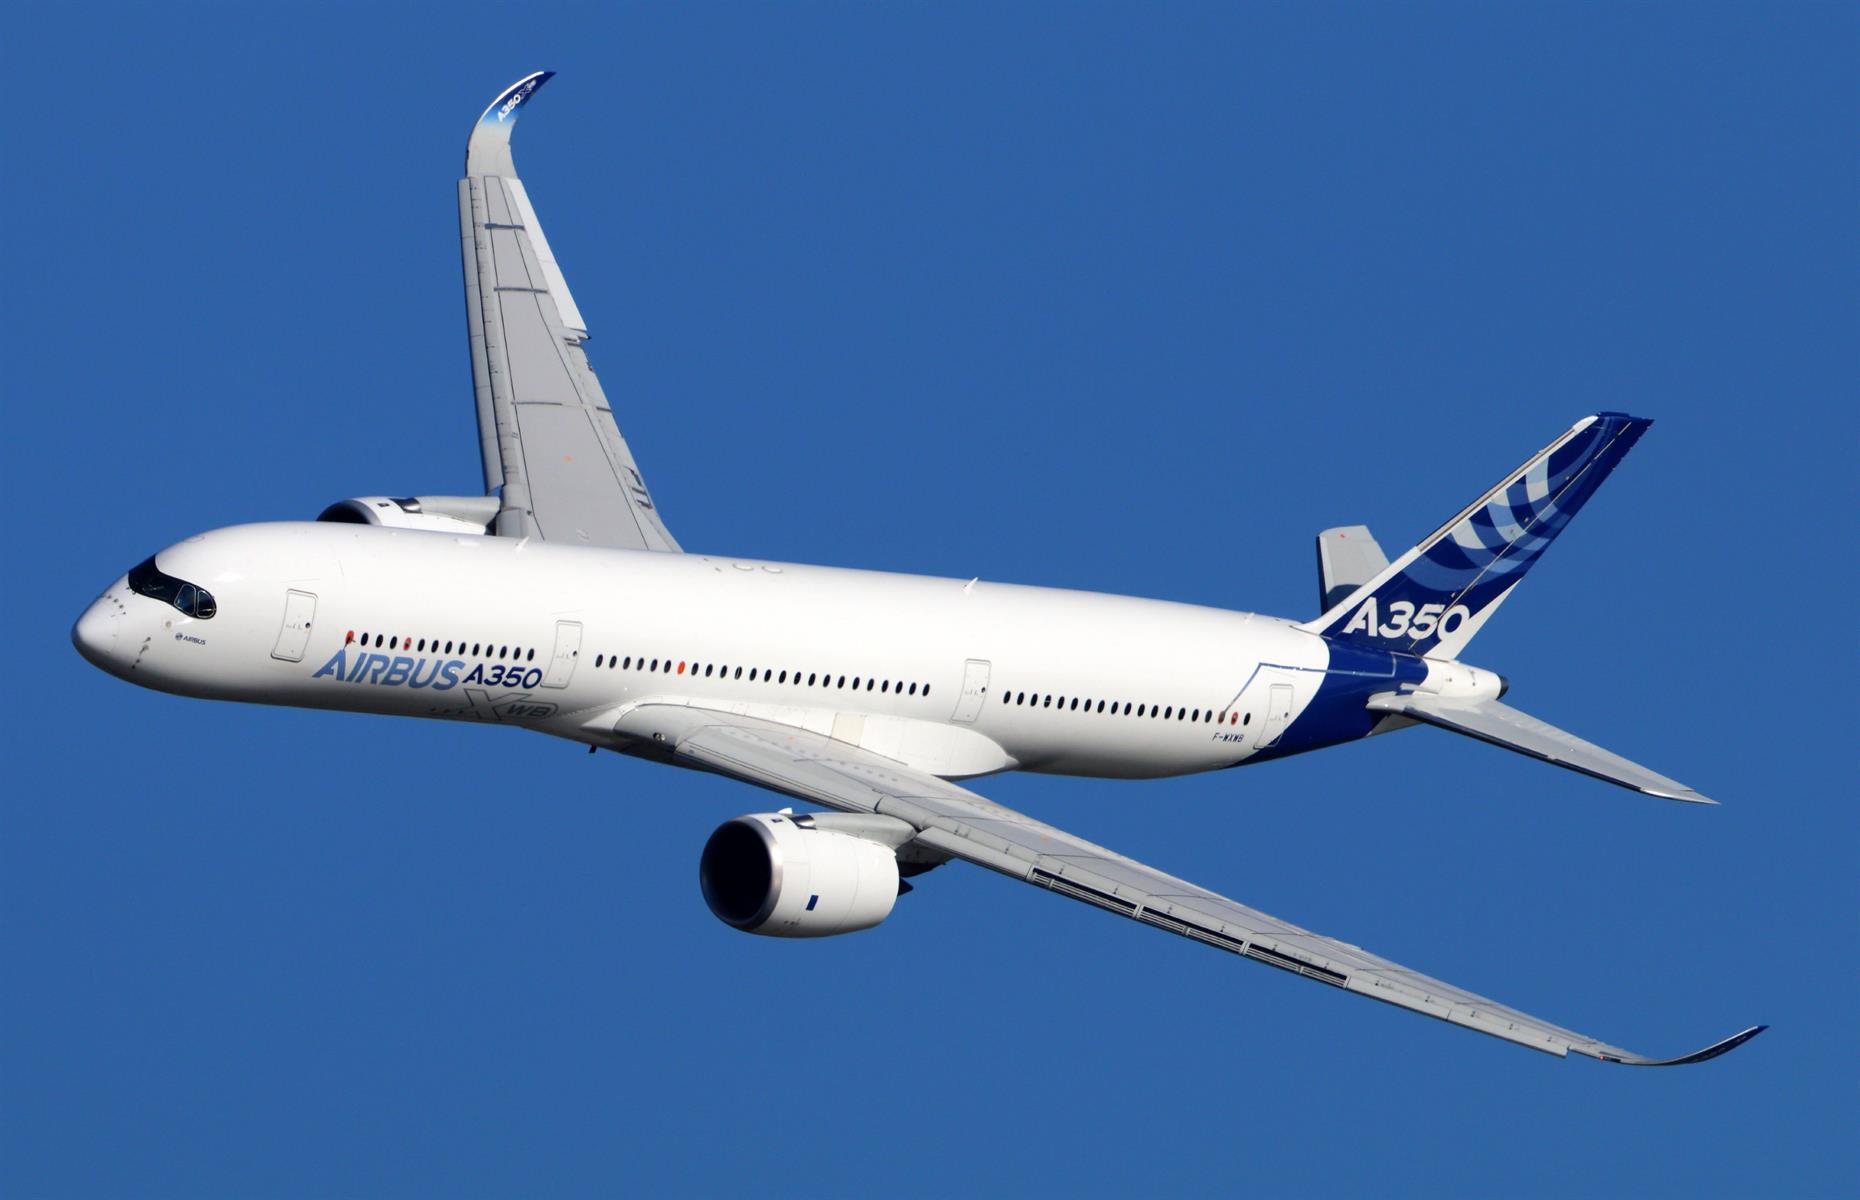 <p>At more than 240 feet (74m) long and 20 feet (6m) wide, the Airbus A350 is one massive plane. A direct competitor to the Boeing 787 and 777 models, the A350 first hit the skies in 2015, and has now completed almost a million flights worldwide without accident. The 308-tonne plane fits nine seats across in two of its typical three seating classes, with 13-inch in-flight entertainment screens and enlarged overhead lockers. Airbus <a href="https://aircraft.airbus.com/en/aircraft/a350-clean-sheet-clean-start/a350-1000">proudly boasts</a> that the plane is "the quietest twin-aisle cabin in the skies", with LED lighting to encourage sleep and minimise jet lag.</p>